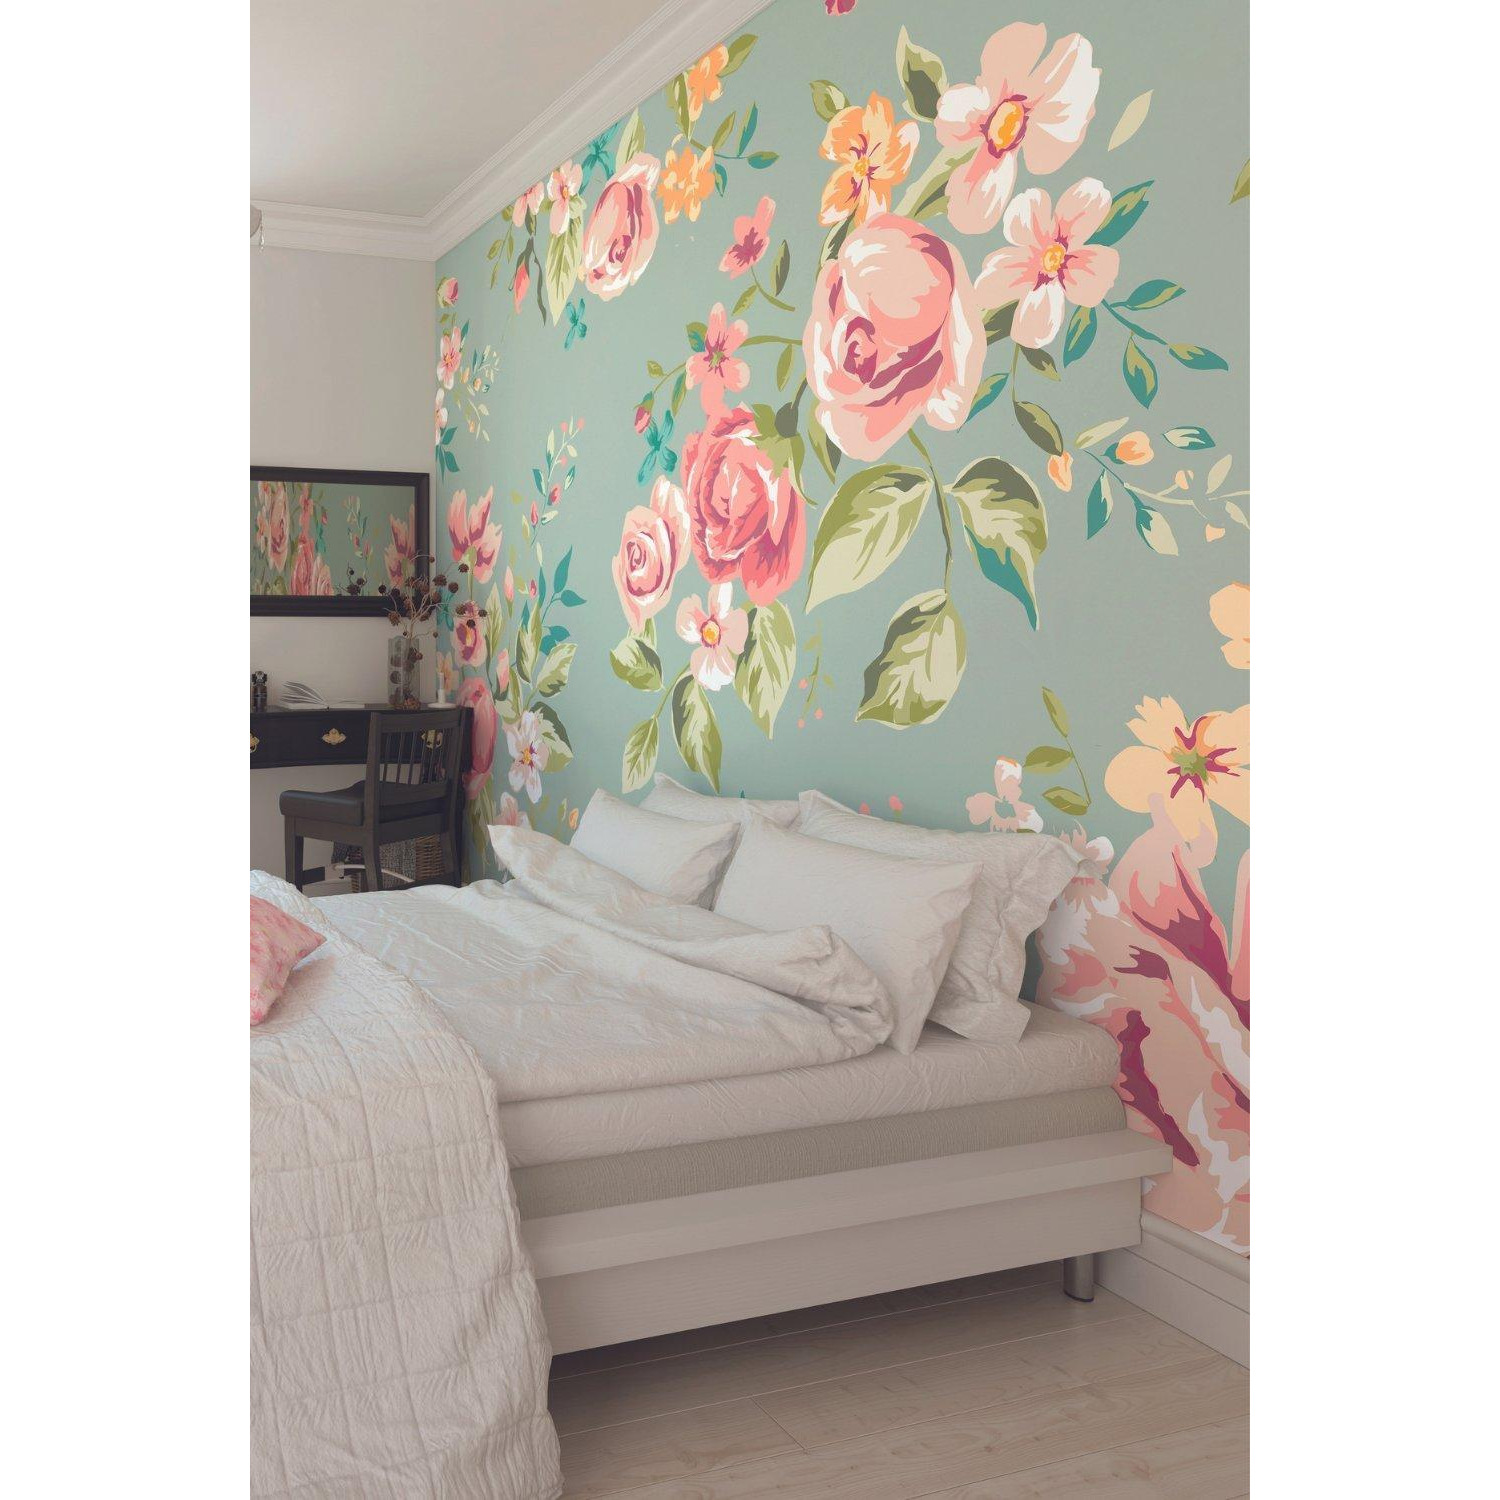 Flowery Matt Smooth Paste the Wall Mural 300cm wide x 240cm high - image 1